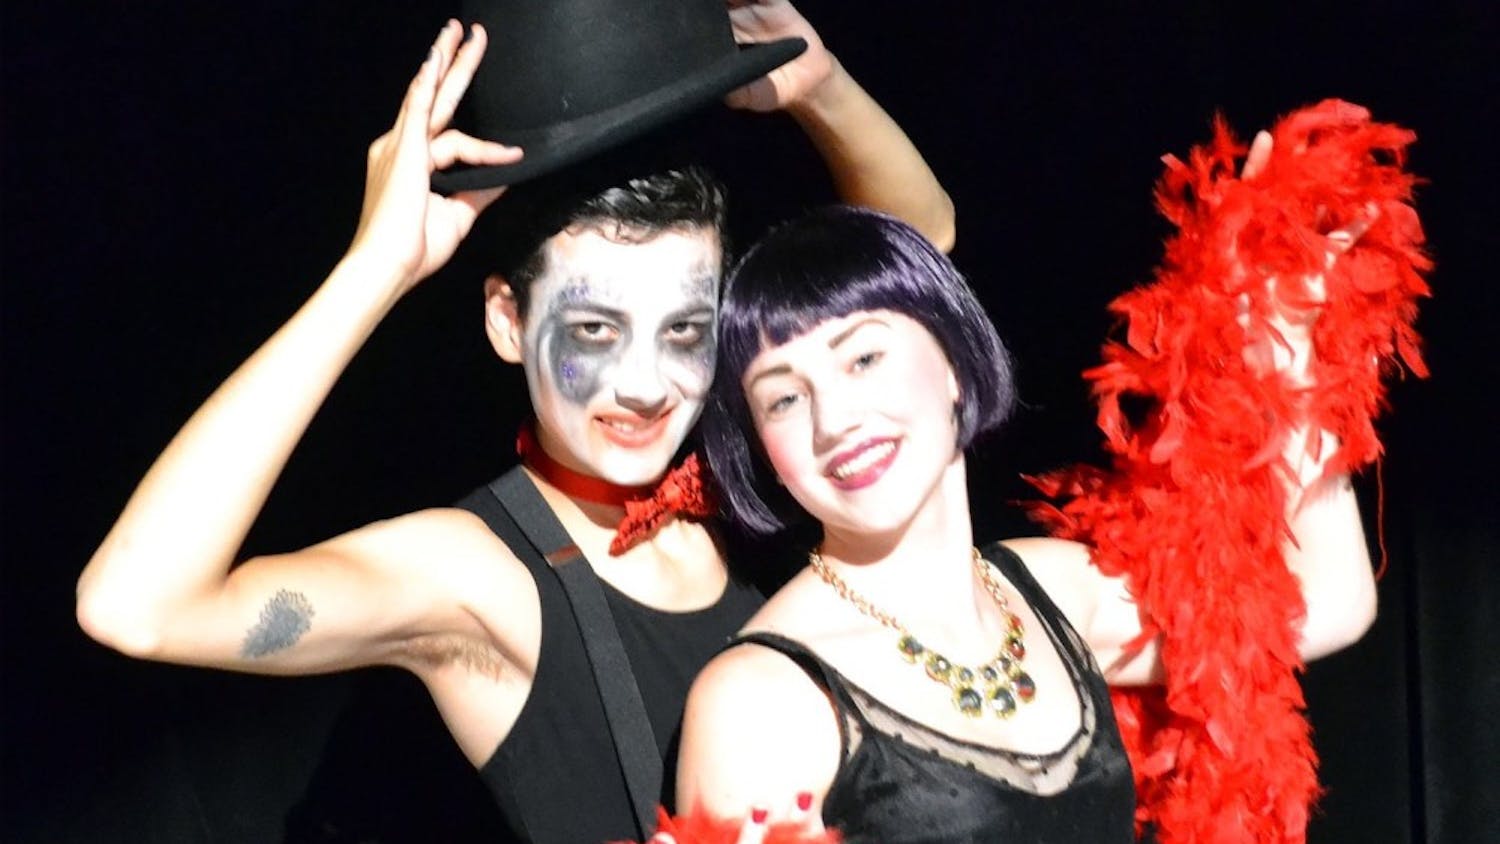 Cabaret's Emcee and Sally Bowles